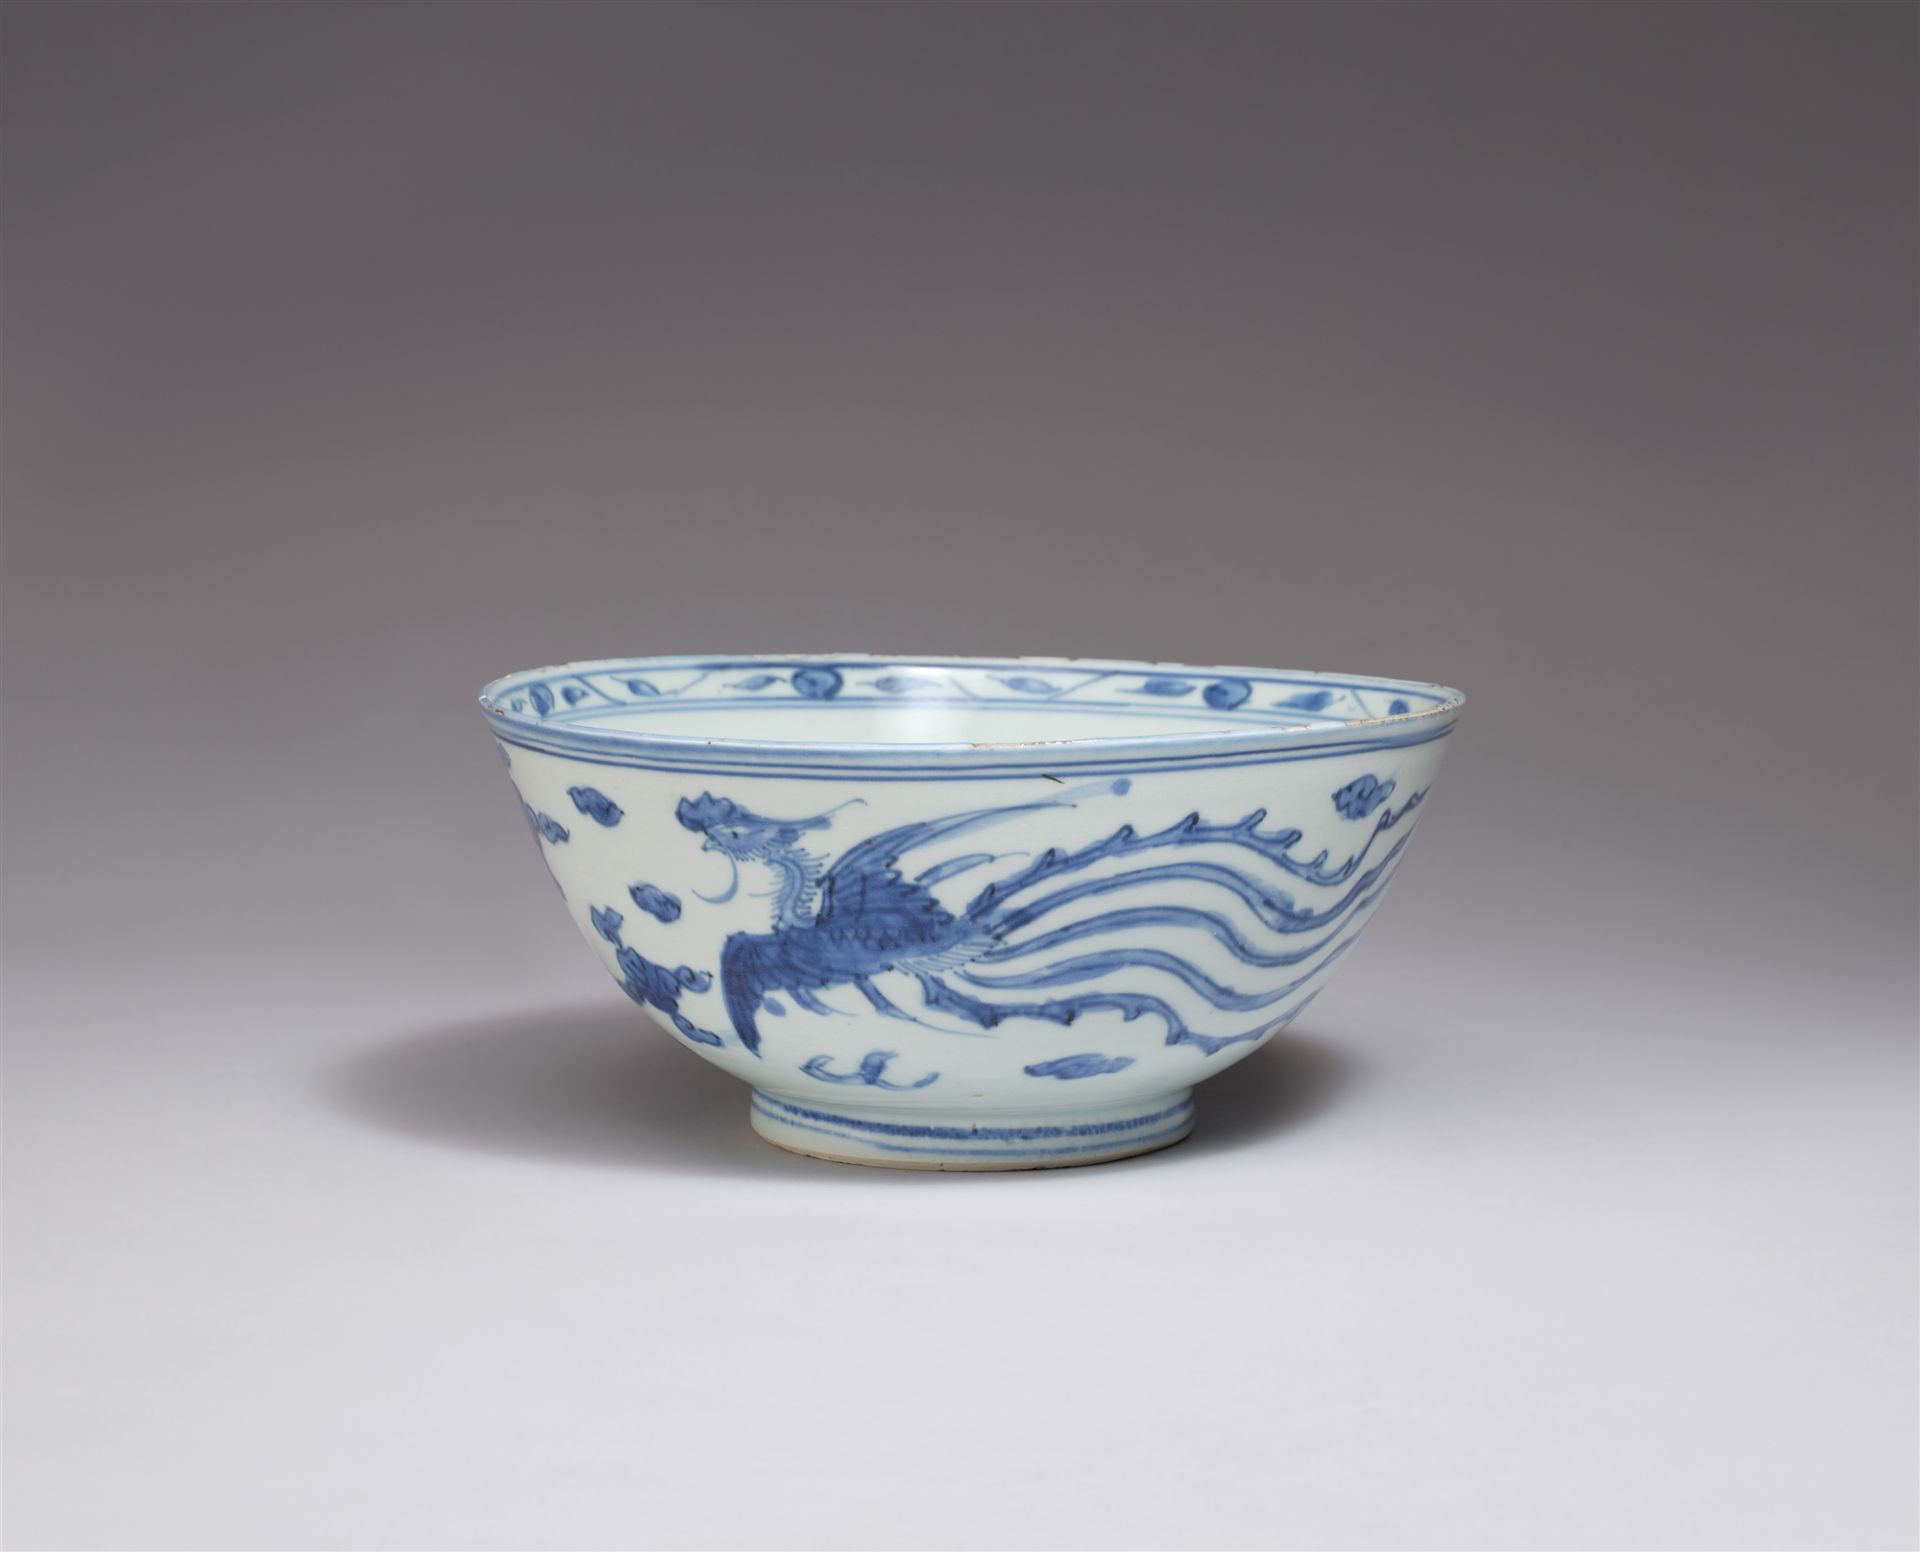 A blue and white bowl with dragon and phoenix. Late Ming dynasty, 17th century - Image 2 of 2